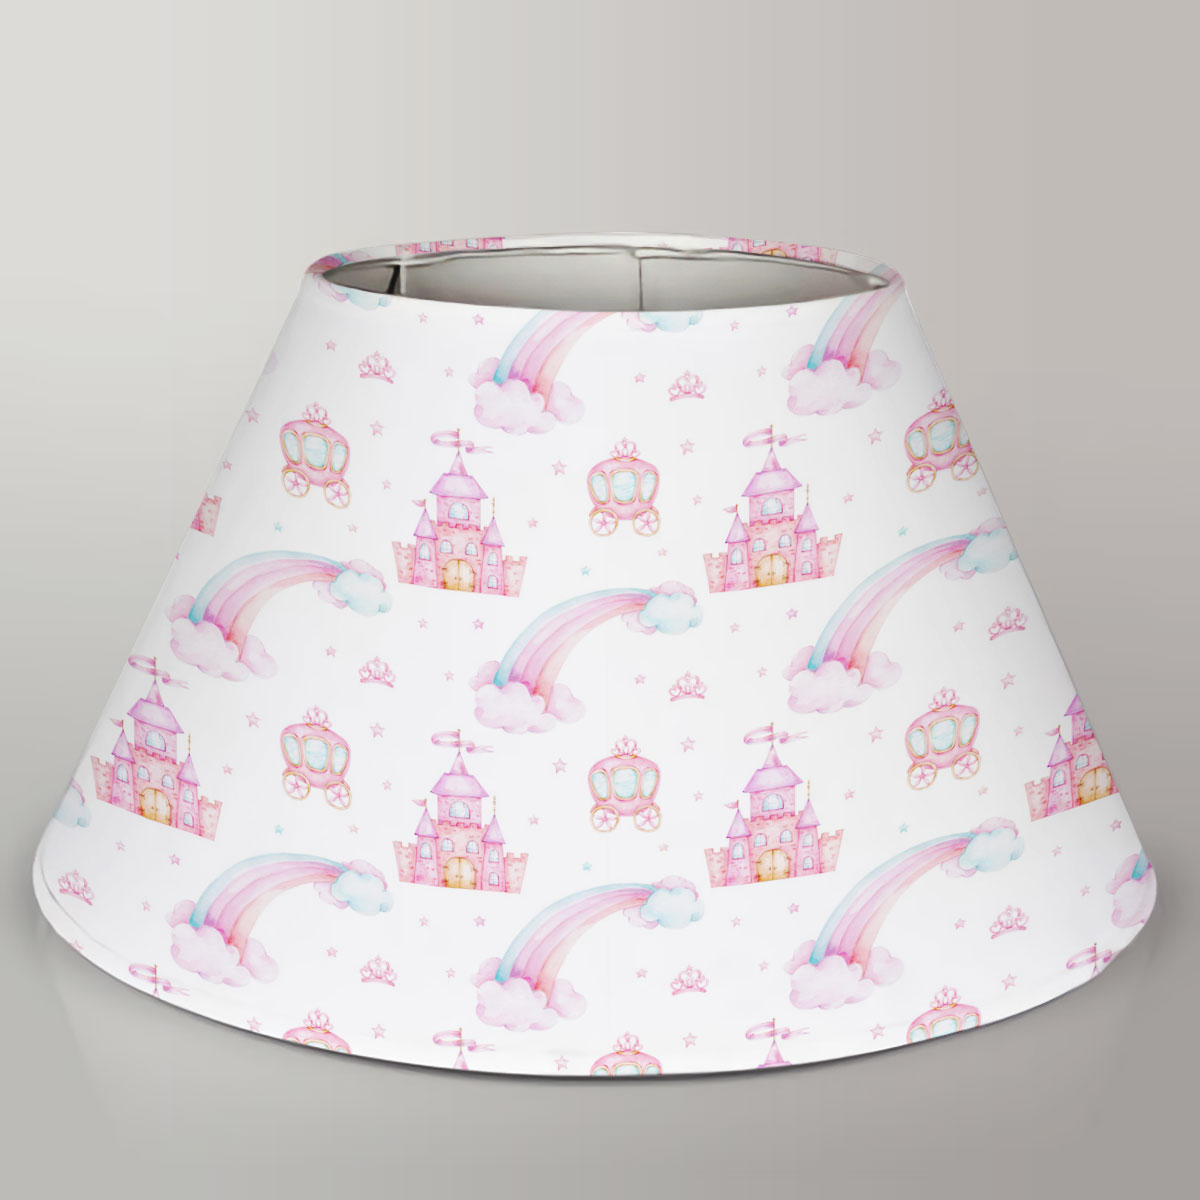 Seamless Pattern With Rainbow, Carriage And Castle Lamp Cover